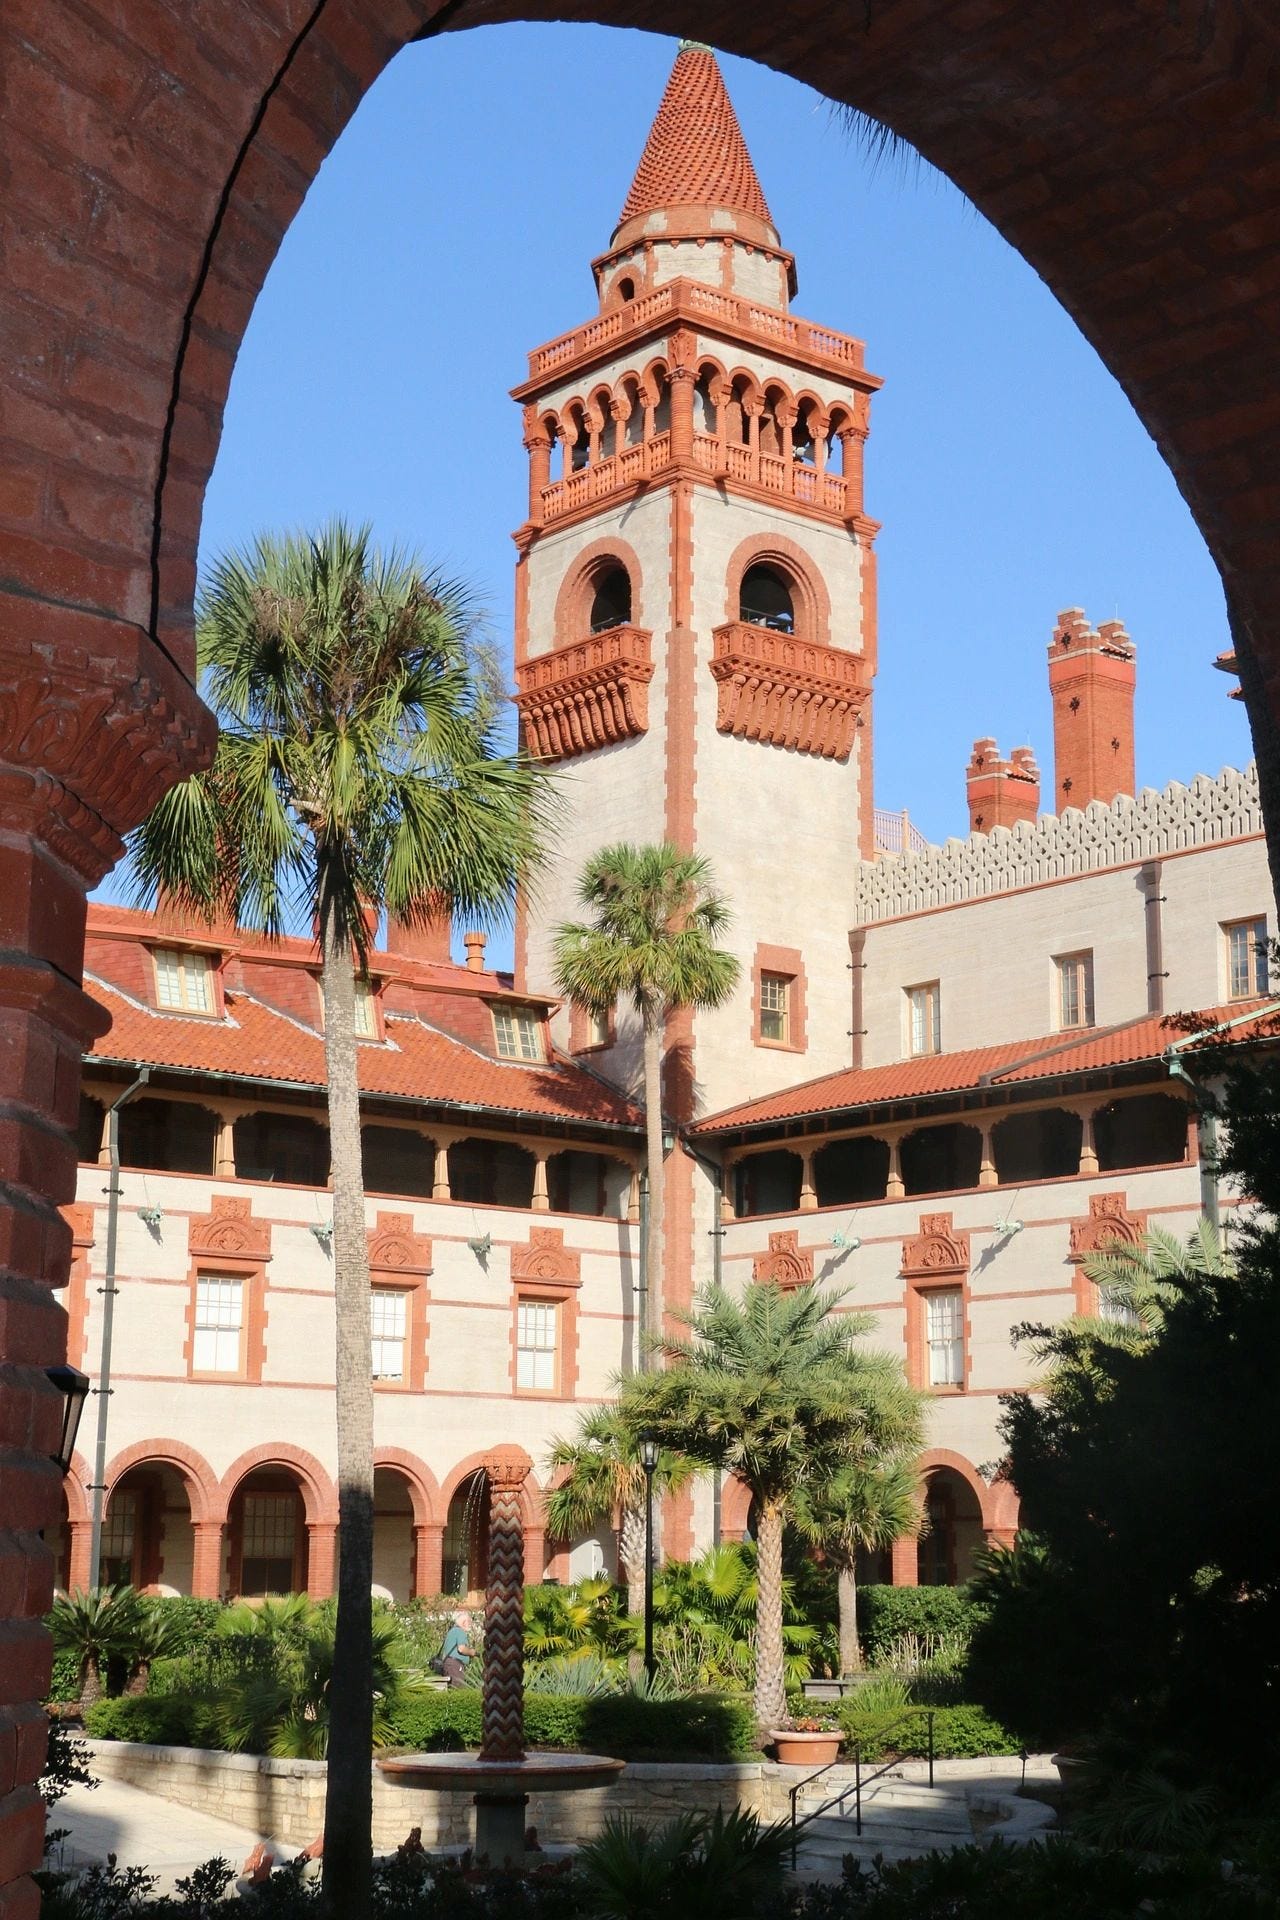 Flagler College Tower in St. Augustine